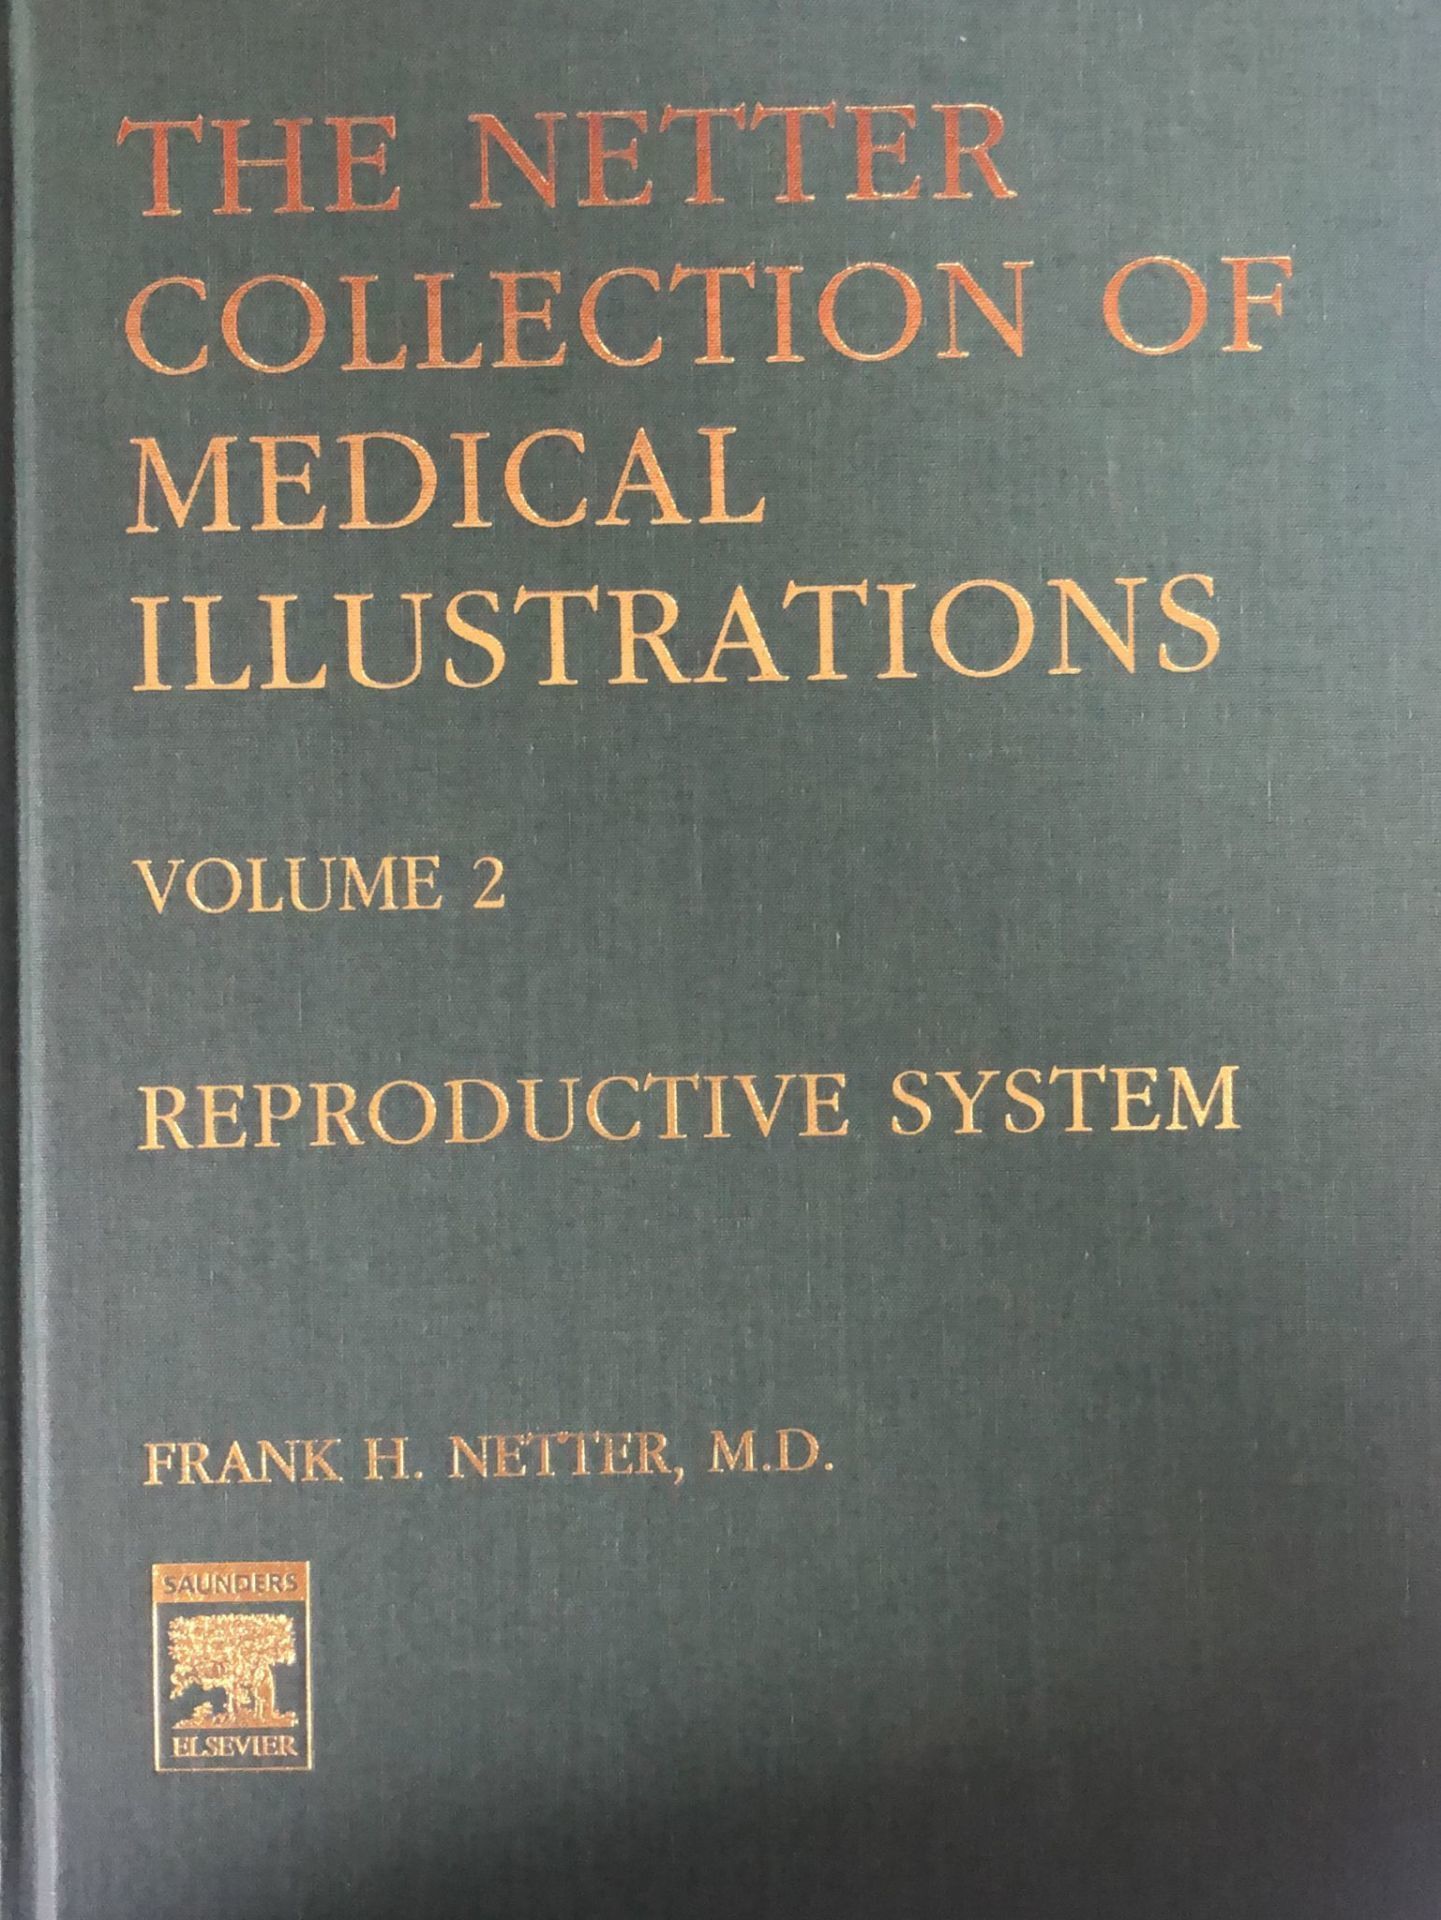 the netter collection of medical illustrations free download